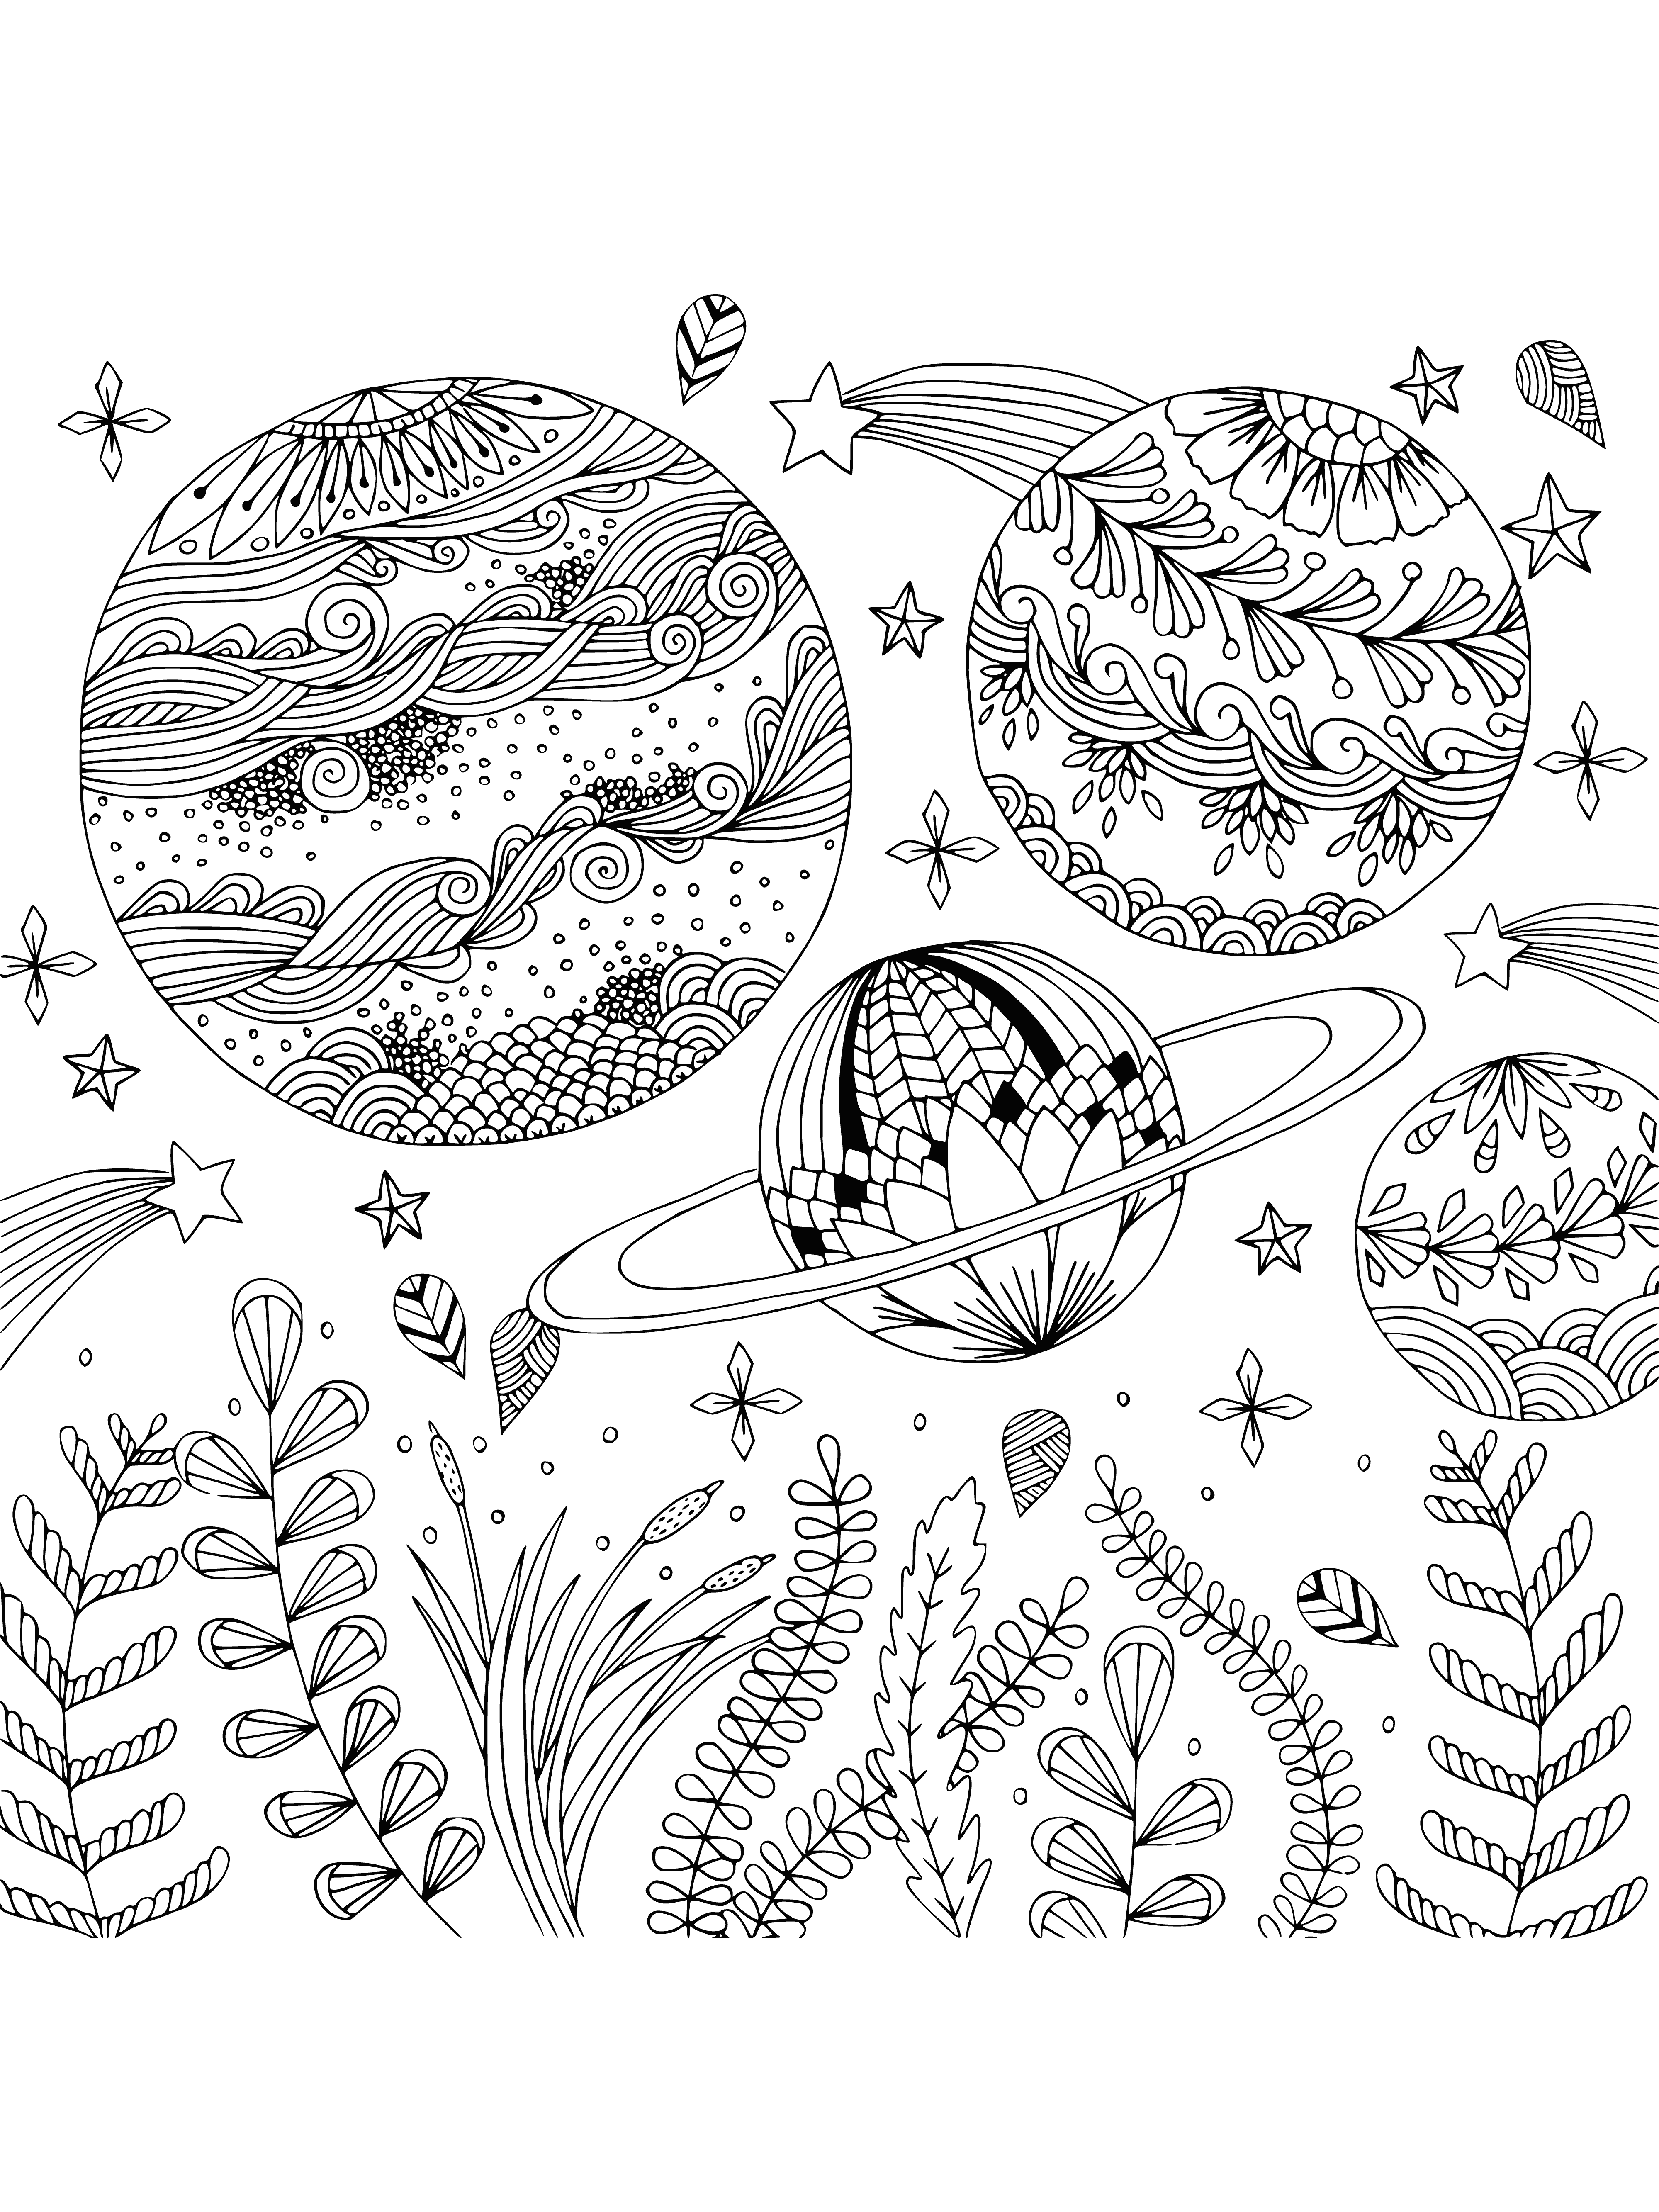 coloring page: A coloring page with unique planets adorned with swirls, patterns, and a soft glow from sunbeams. #coloringpages